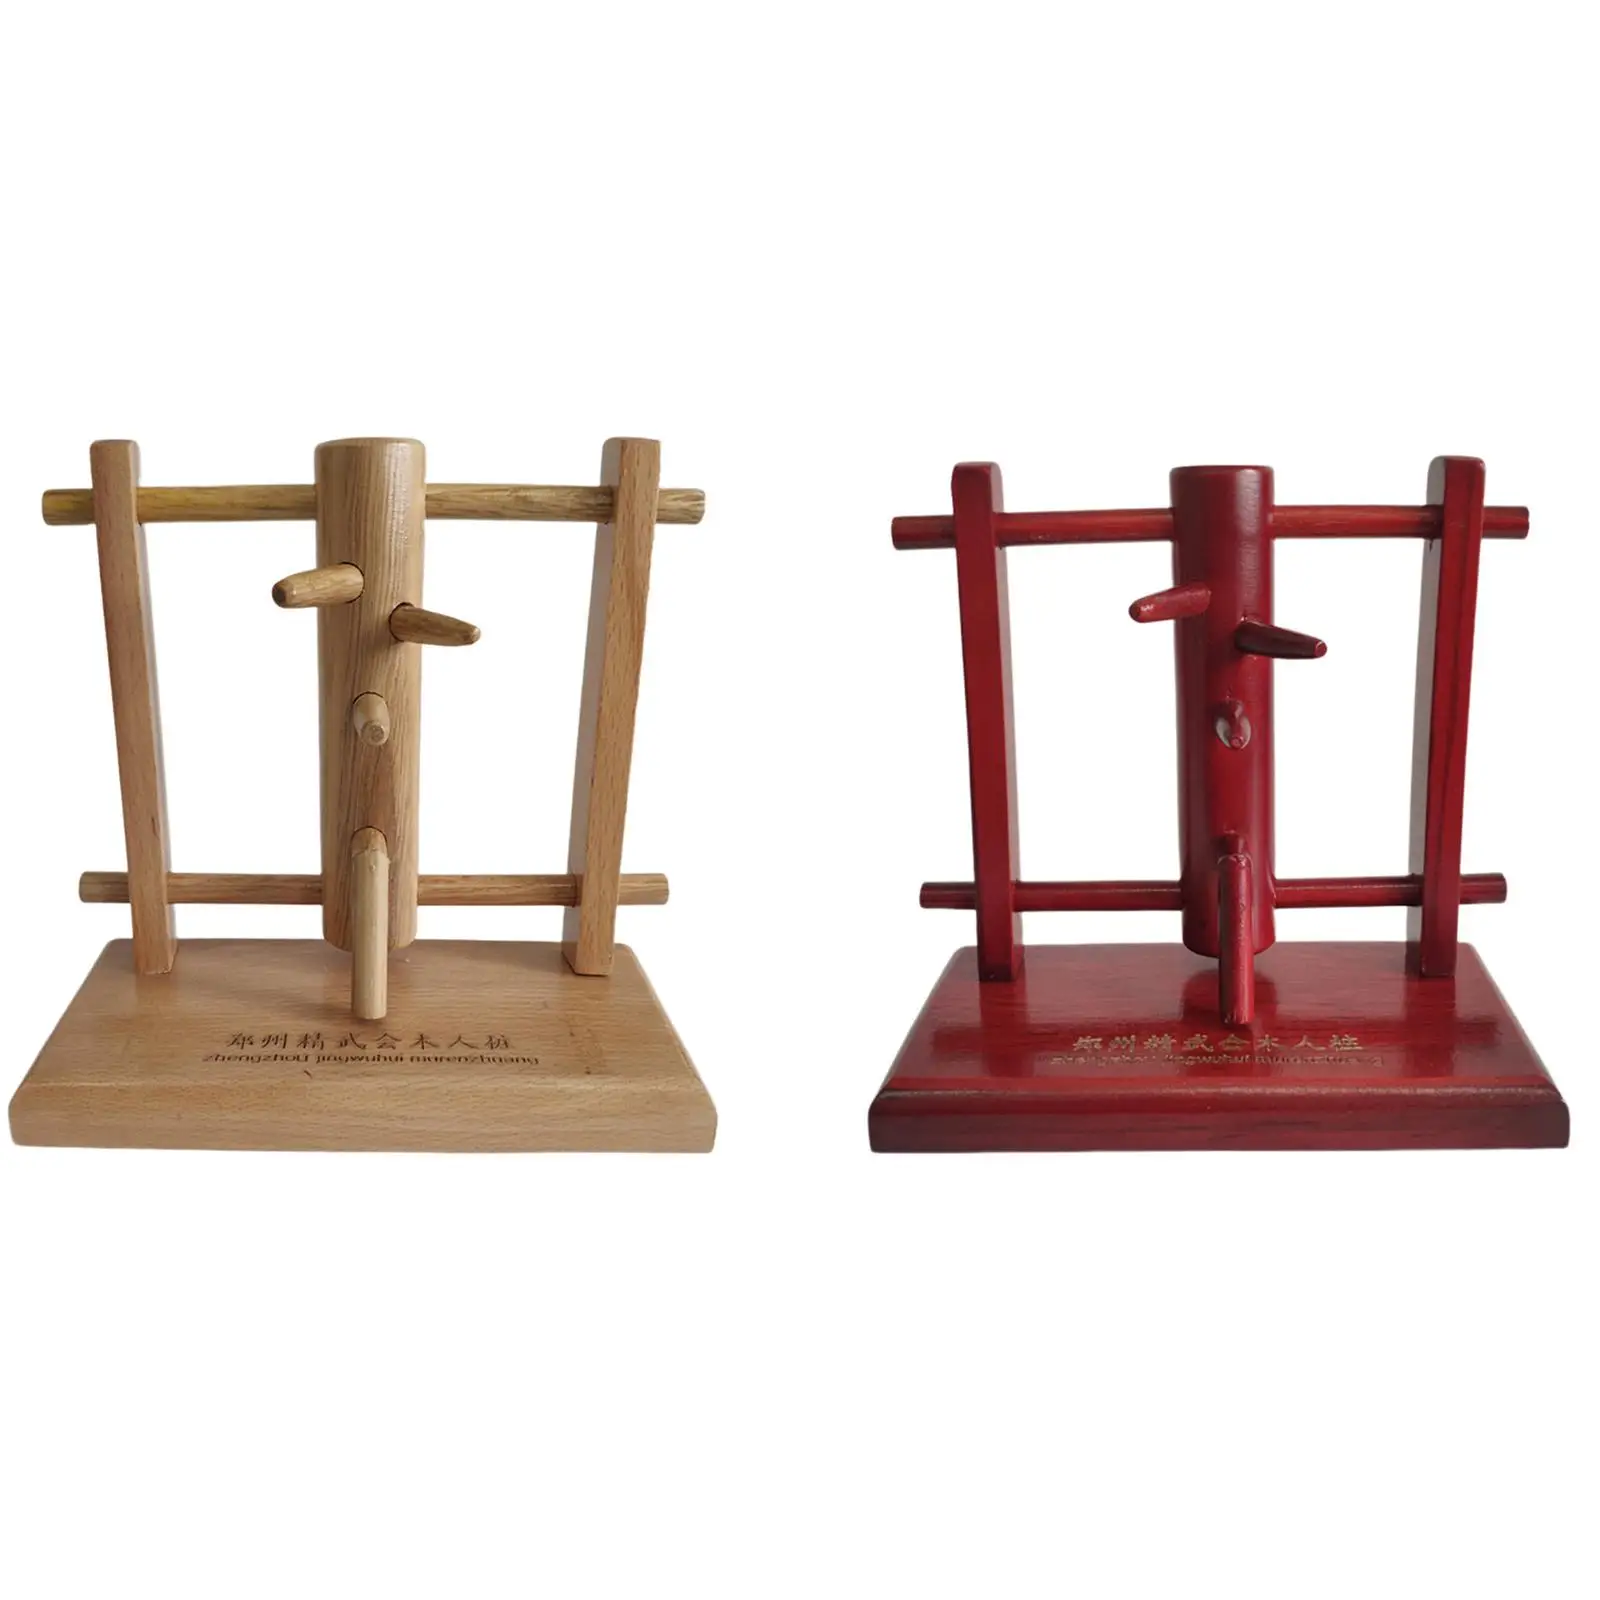 Wooden  Model Decor Wing Chun Sculpture Hanging Ornament Collectible Collection Statue for Martial Arts School Table Home